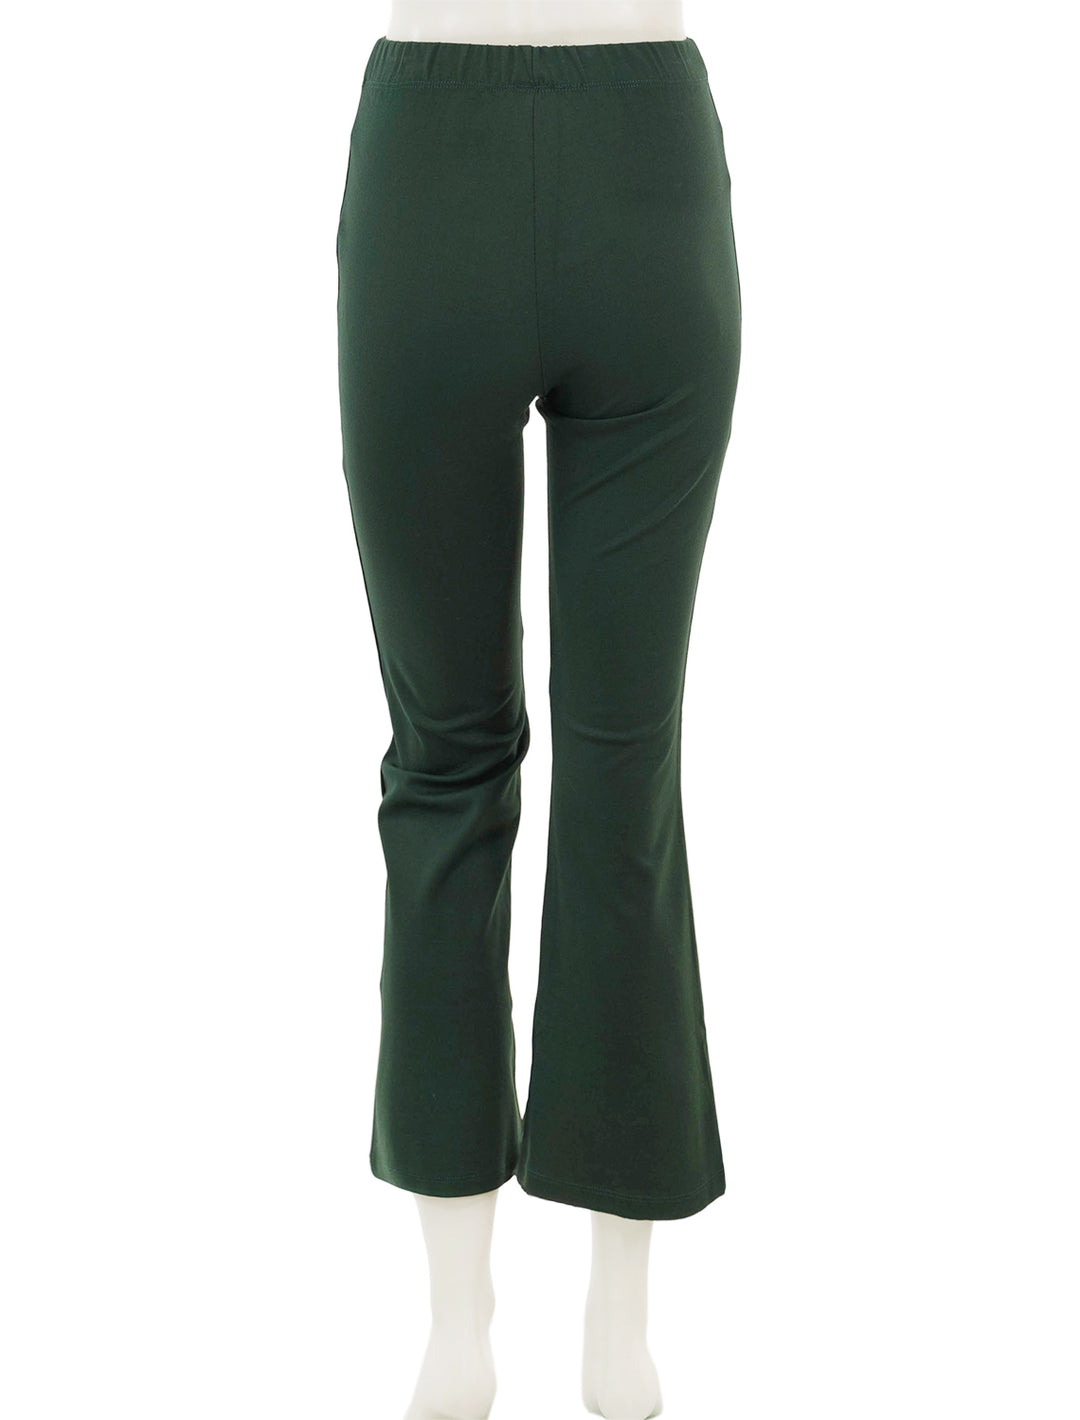 Back view of Clare V.'s le flare ponte pant in forest.